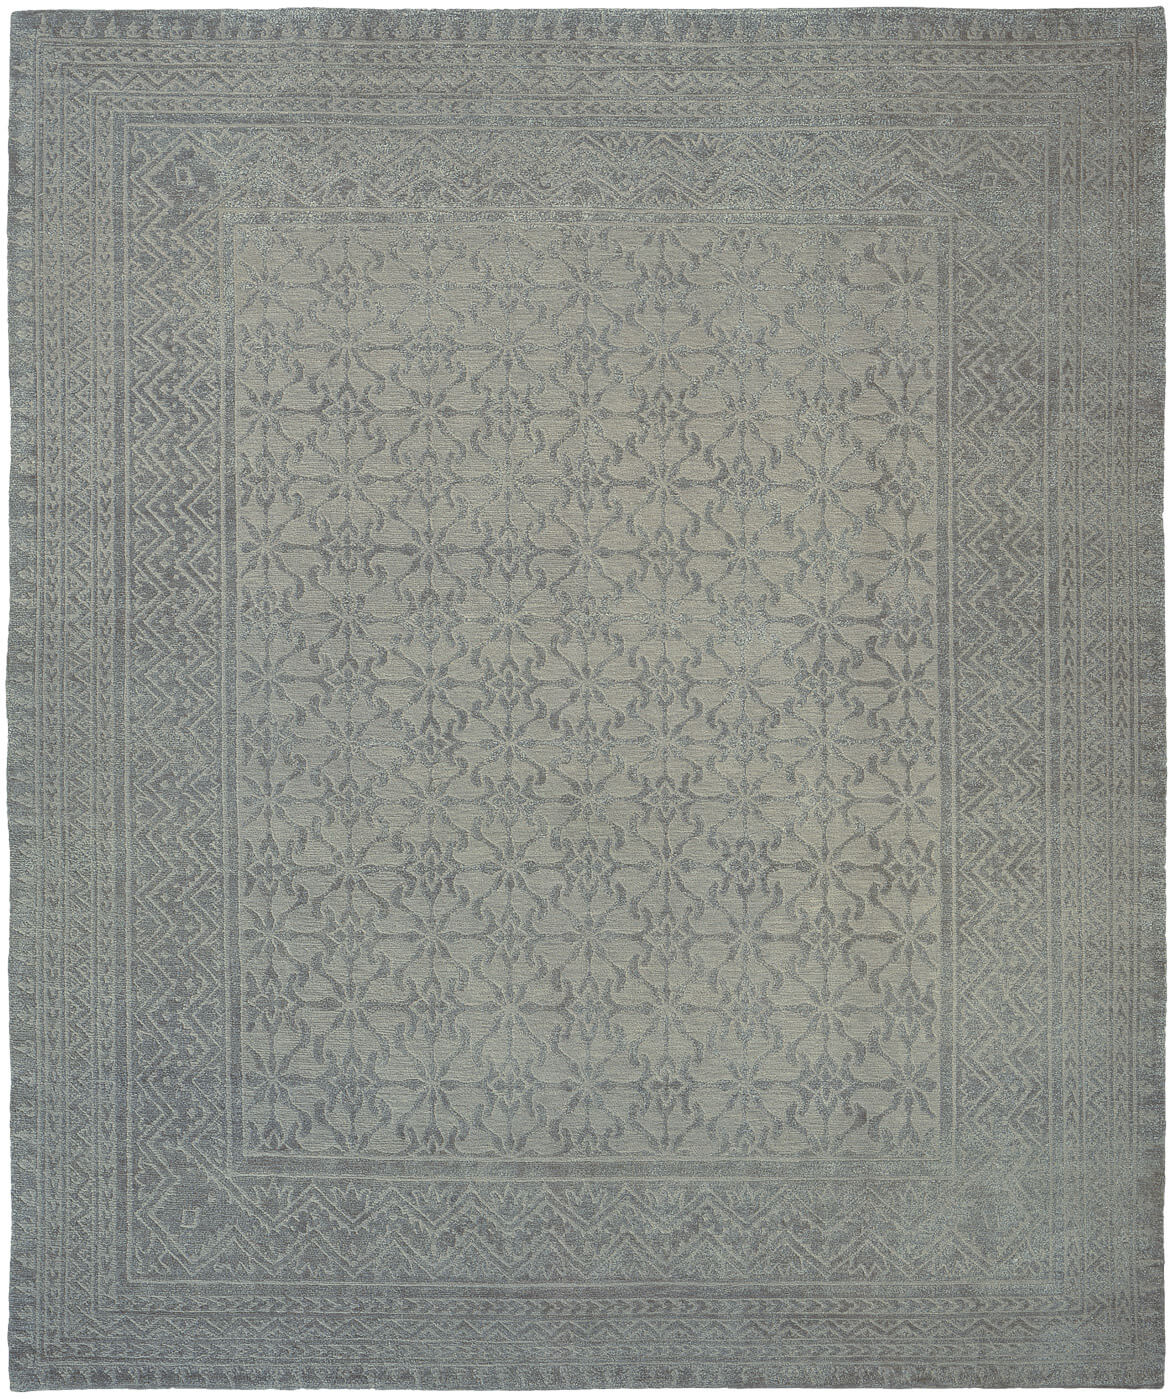 Hand-Woven Blueberry Grey Rug